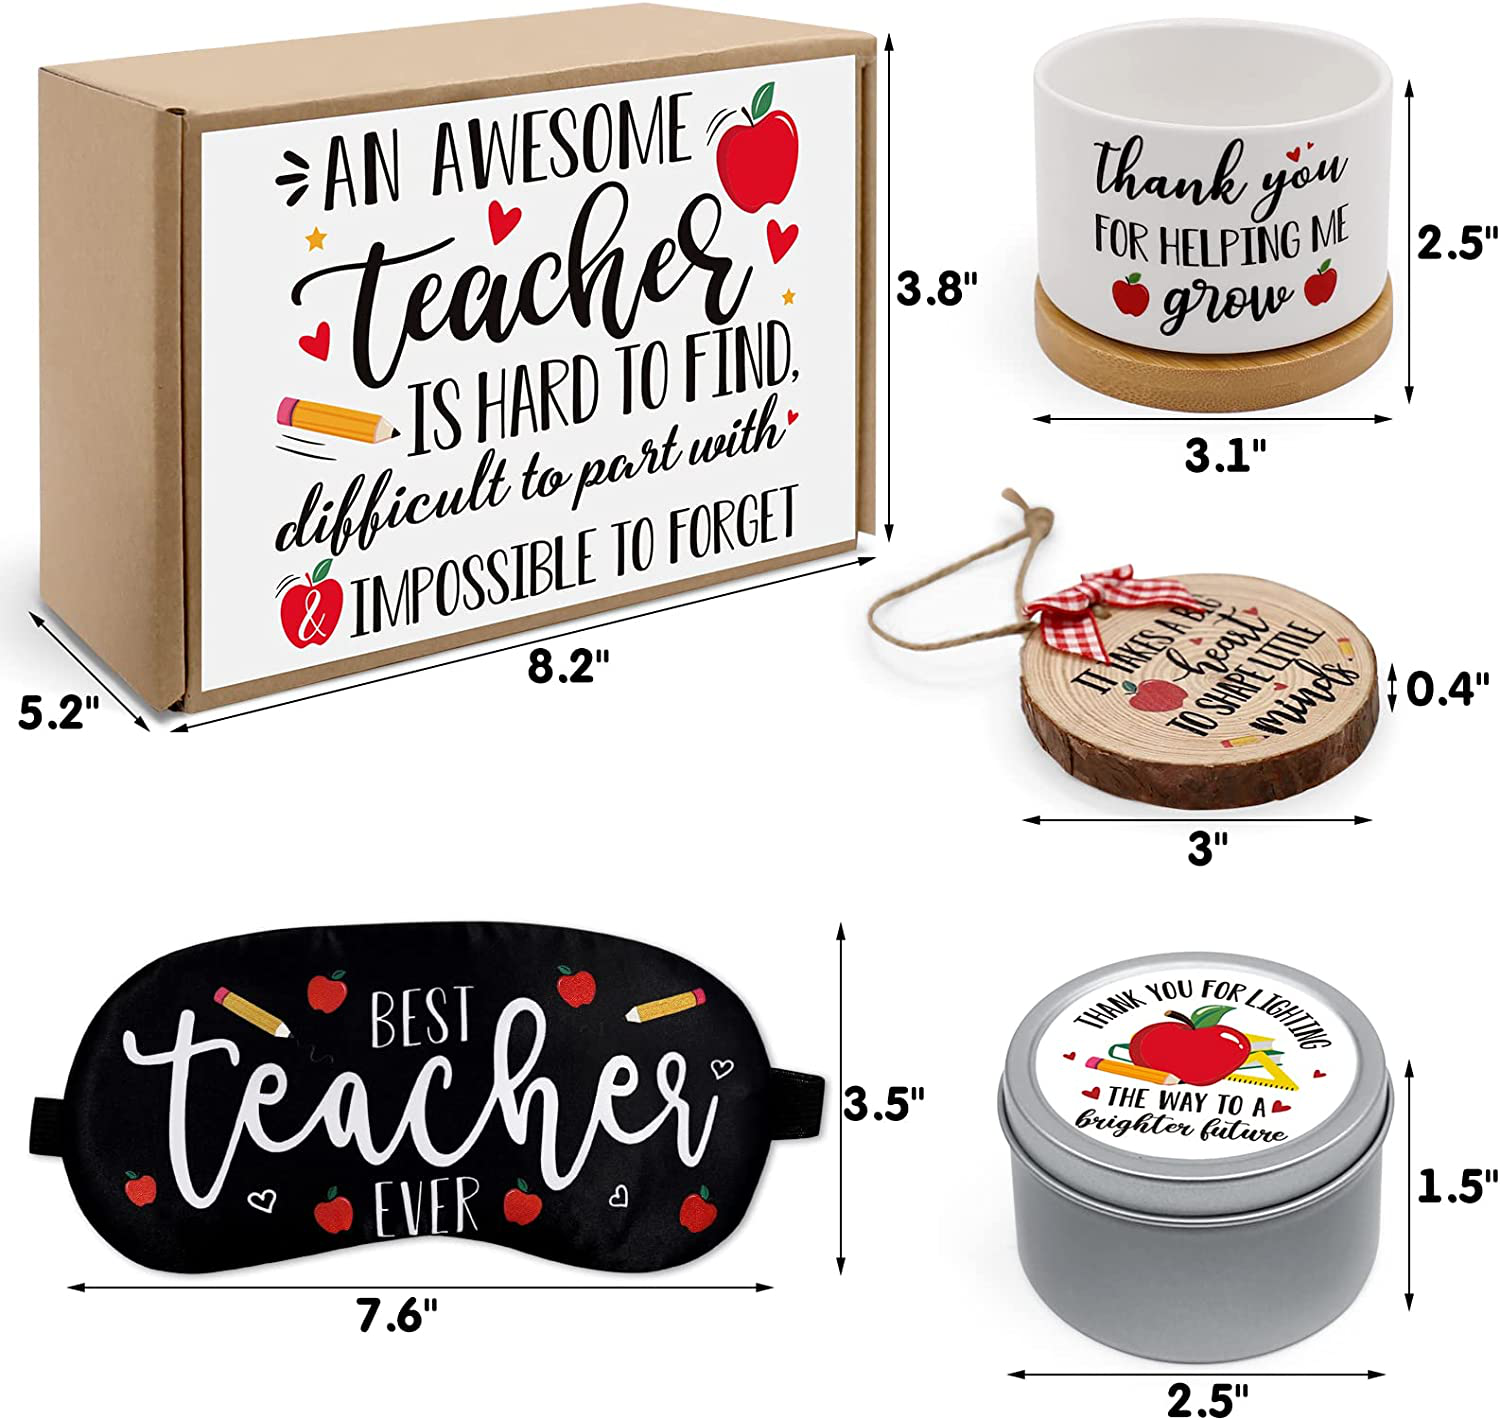 Teacher Appreciation Gift Basket Birthday Christmas Gift Box for Master Tutor Mr. Mrs with Holiday Ornament Patch Succulent Plant Pot Greeting Card Apple Candle Present Idea from Student Set of 4